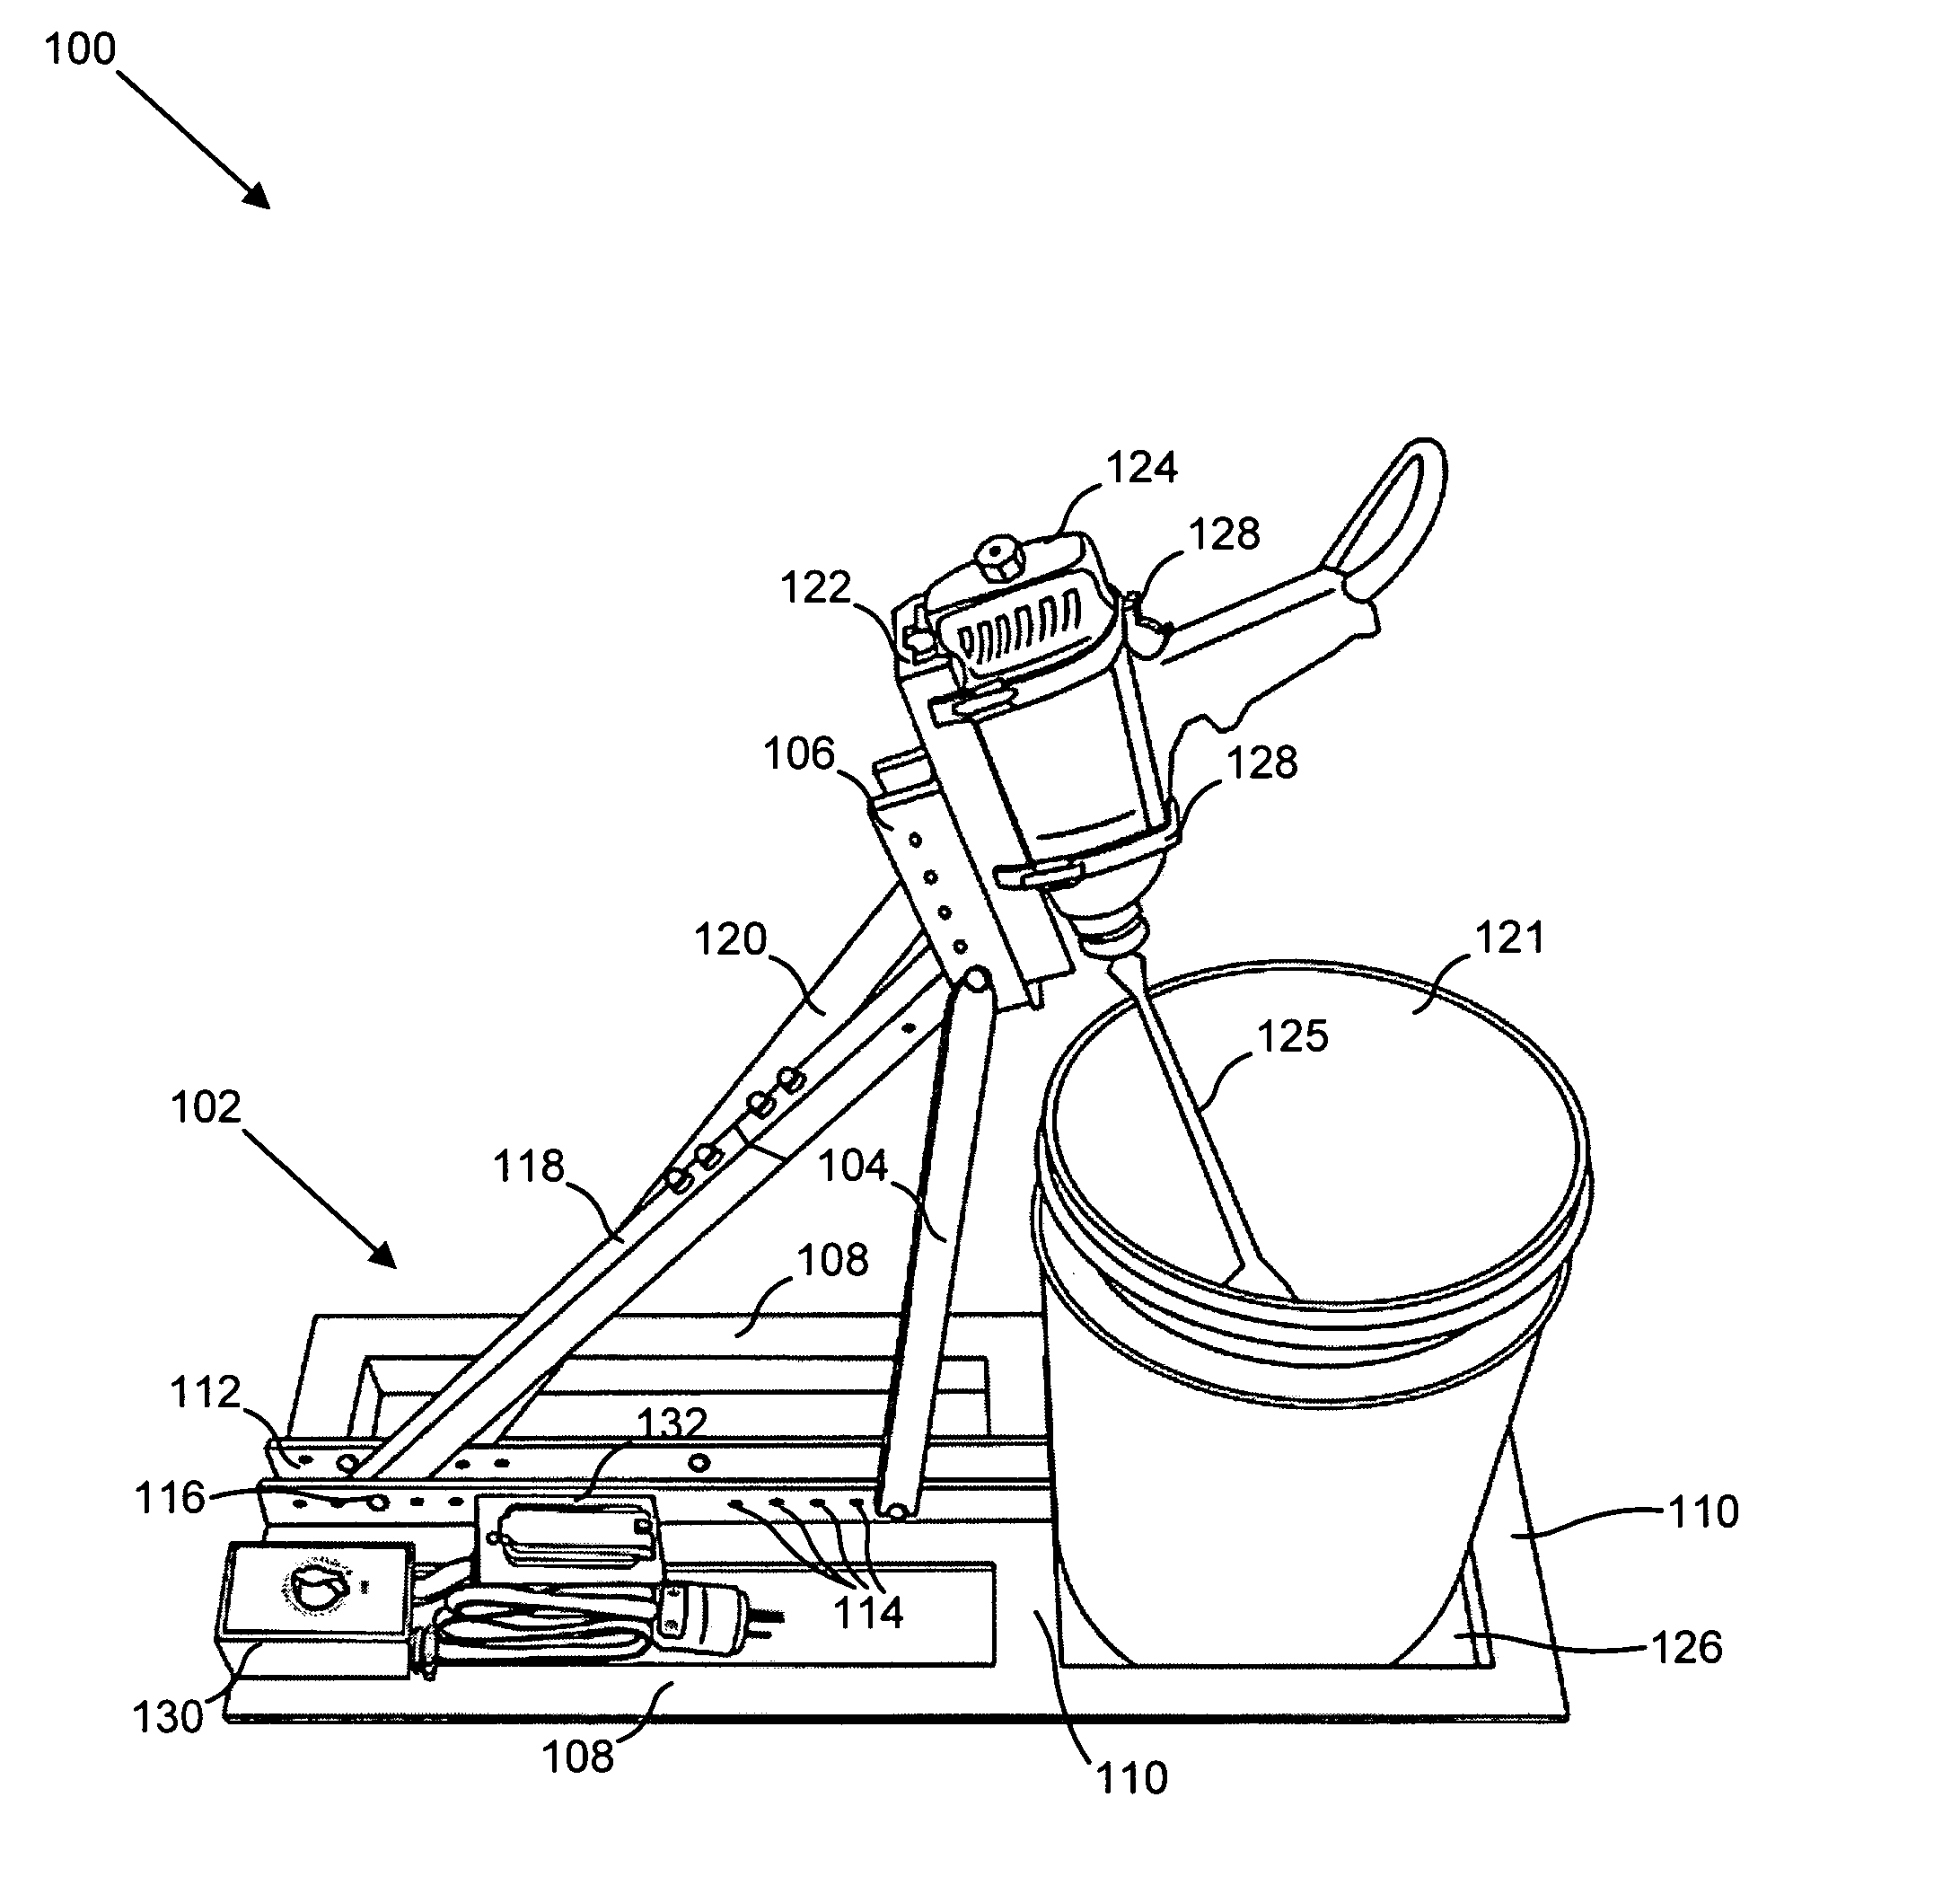 Apparatus and method for mixing materials